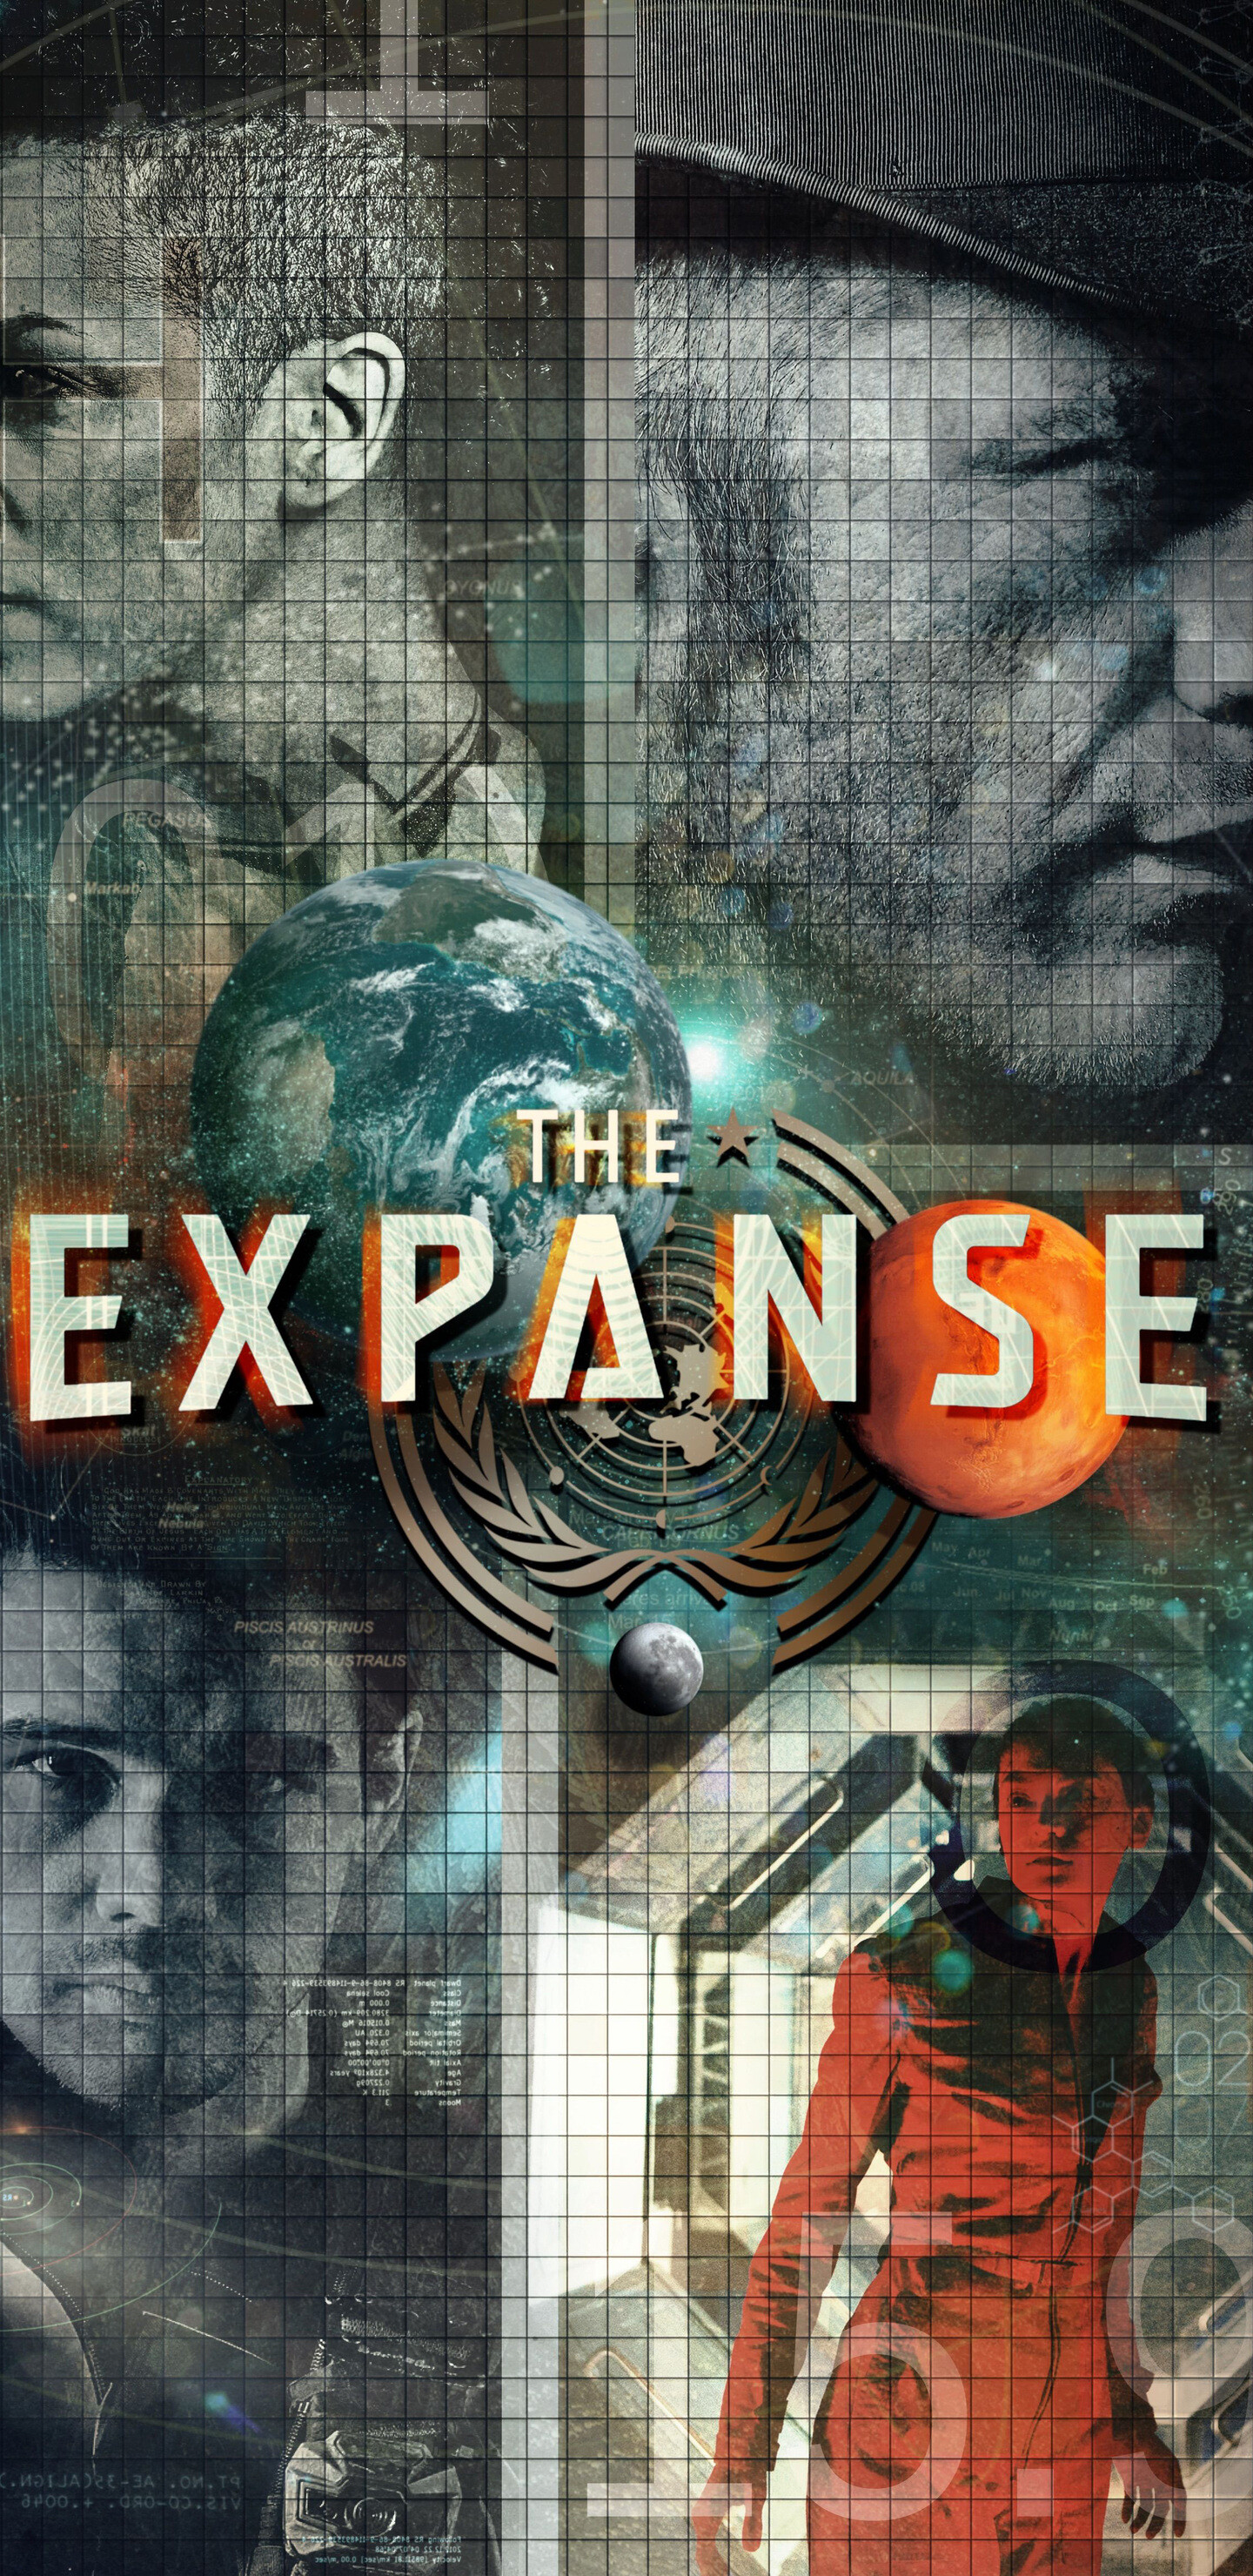 The Expanse: A thriller set two hundred years in the future, follows the case of a missing young woman. 1440x2960 HD Wallpaper.